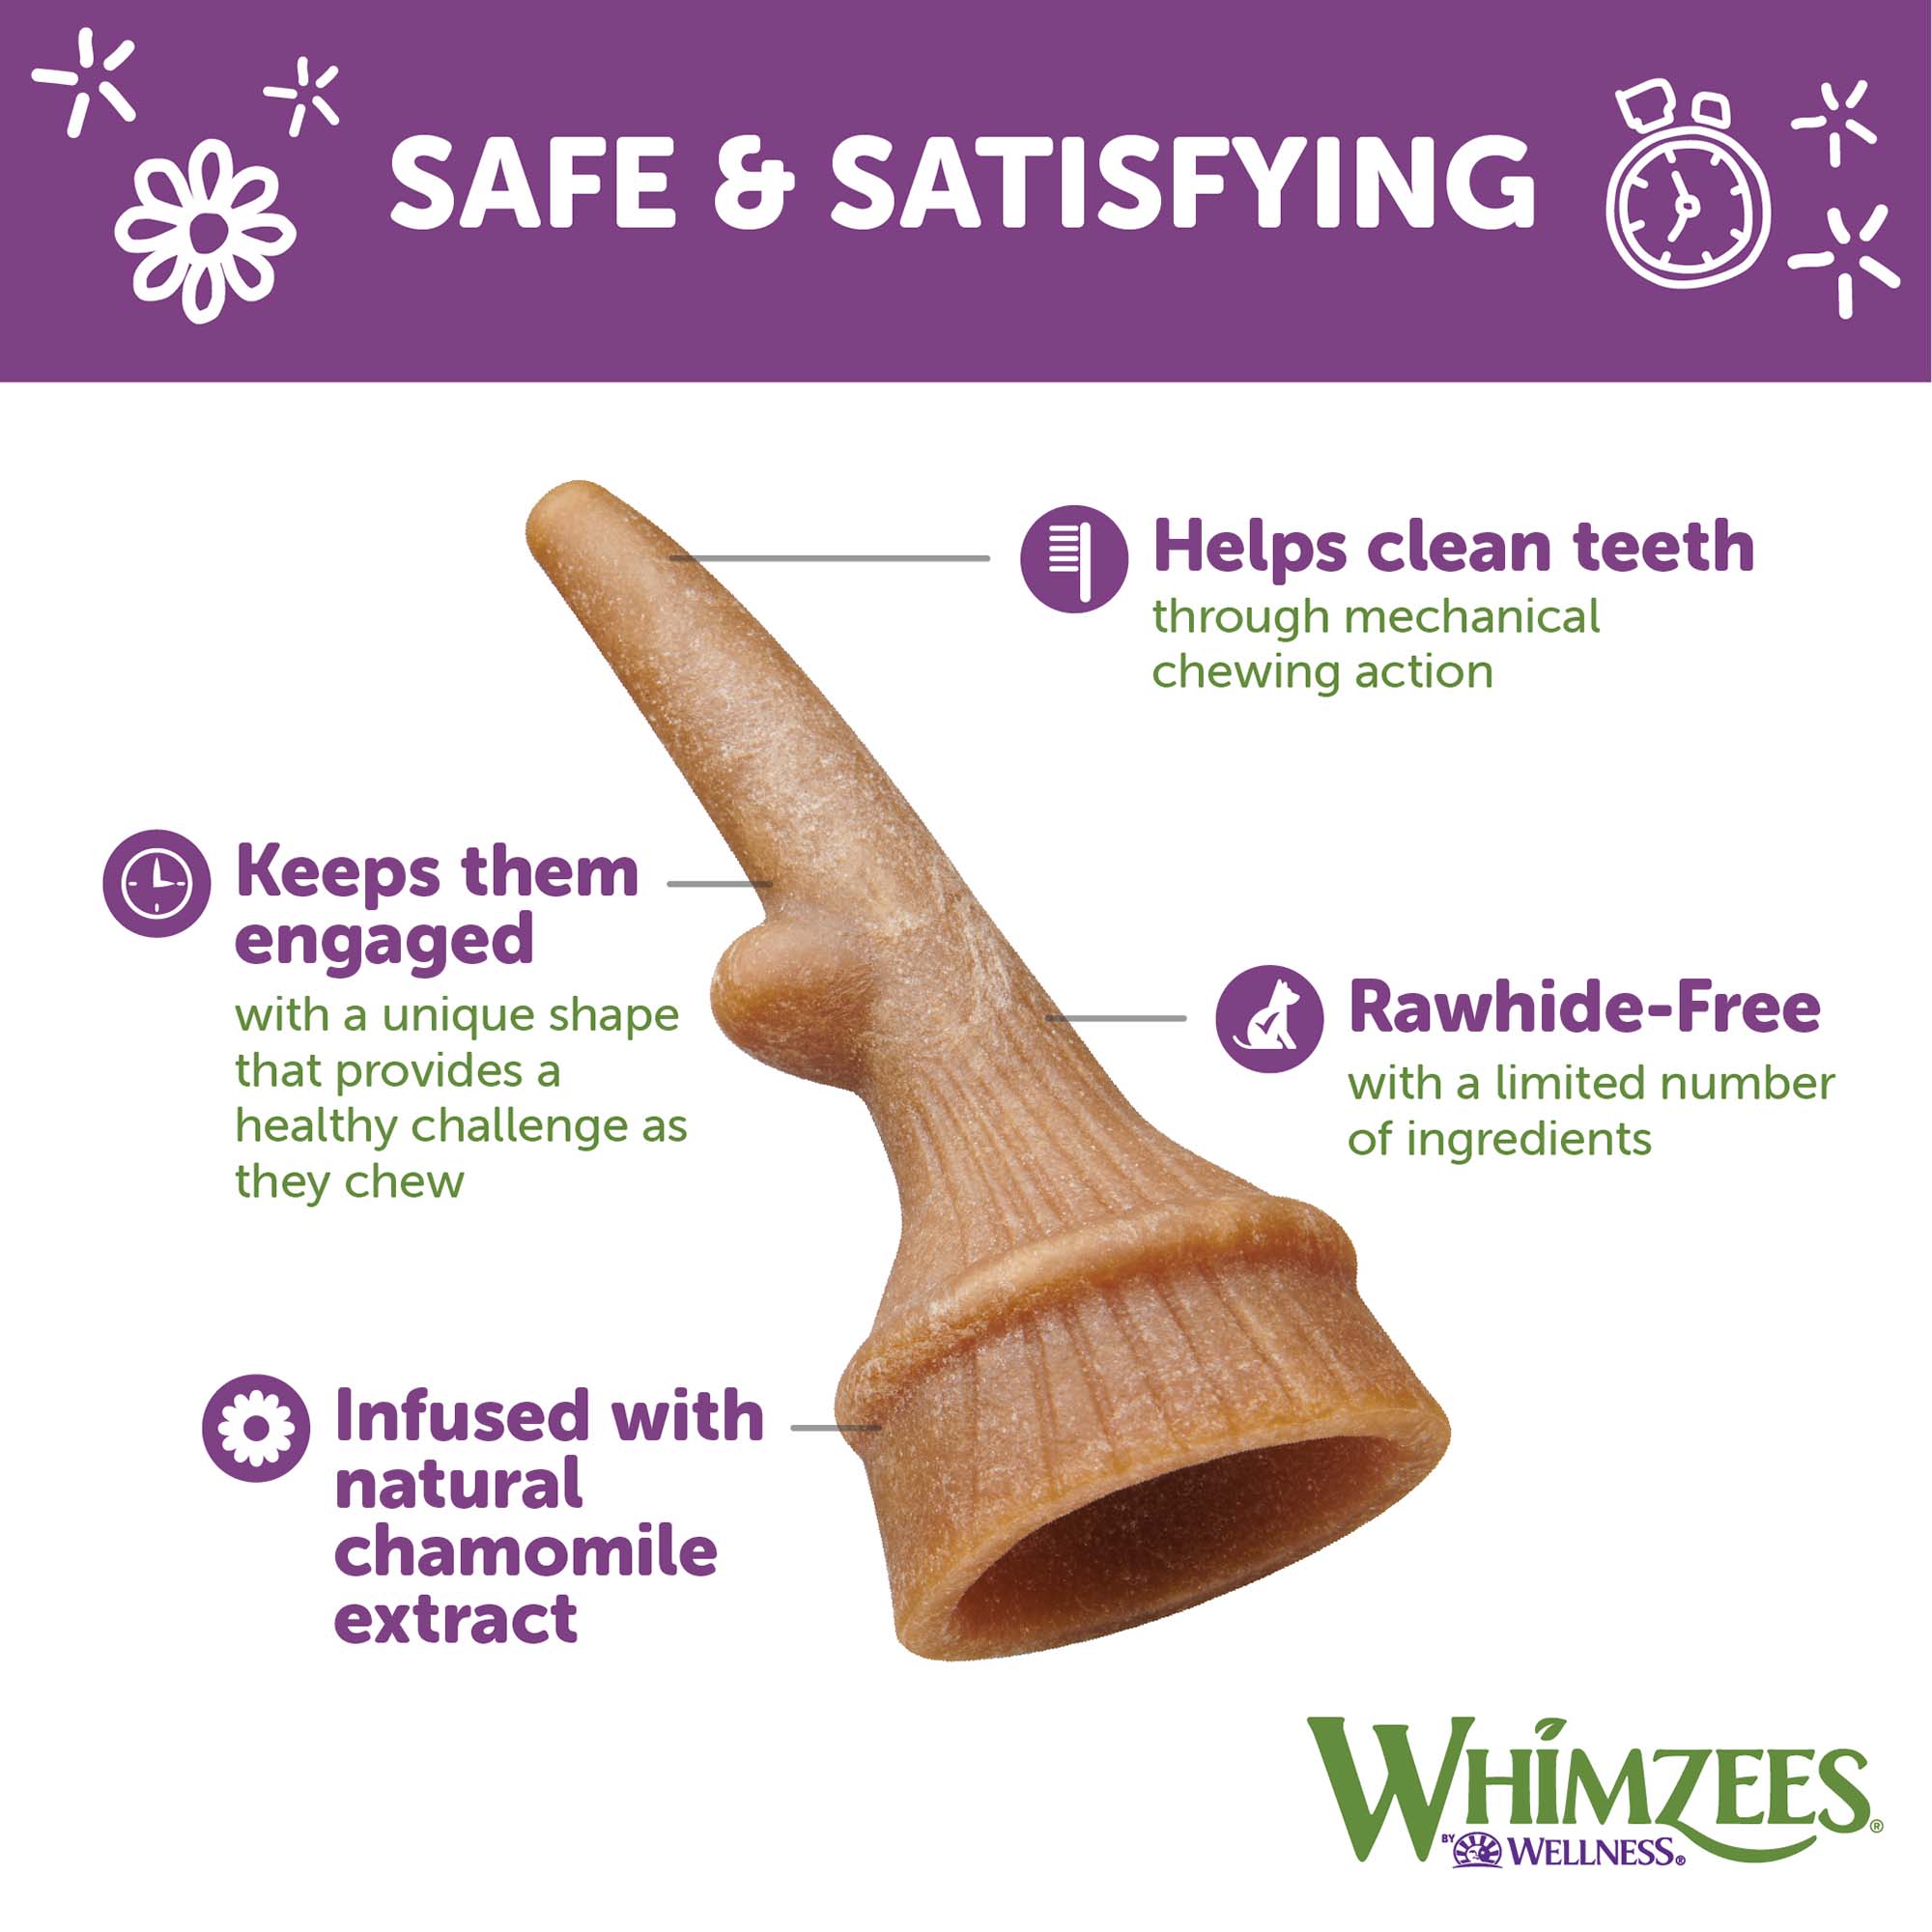 WHIMZEES Value Bags Antler